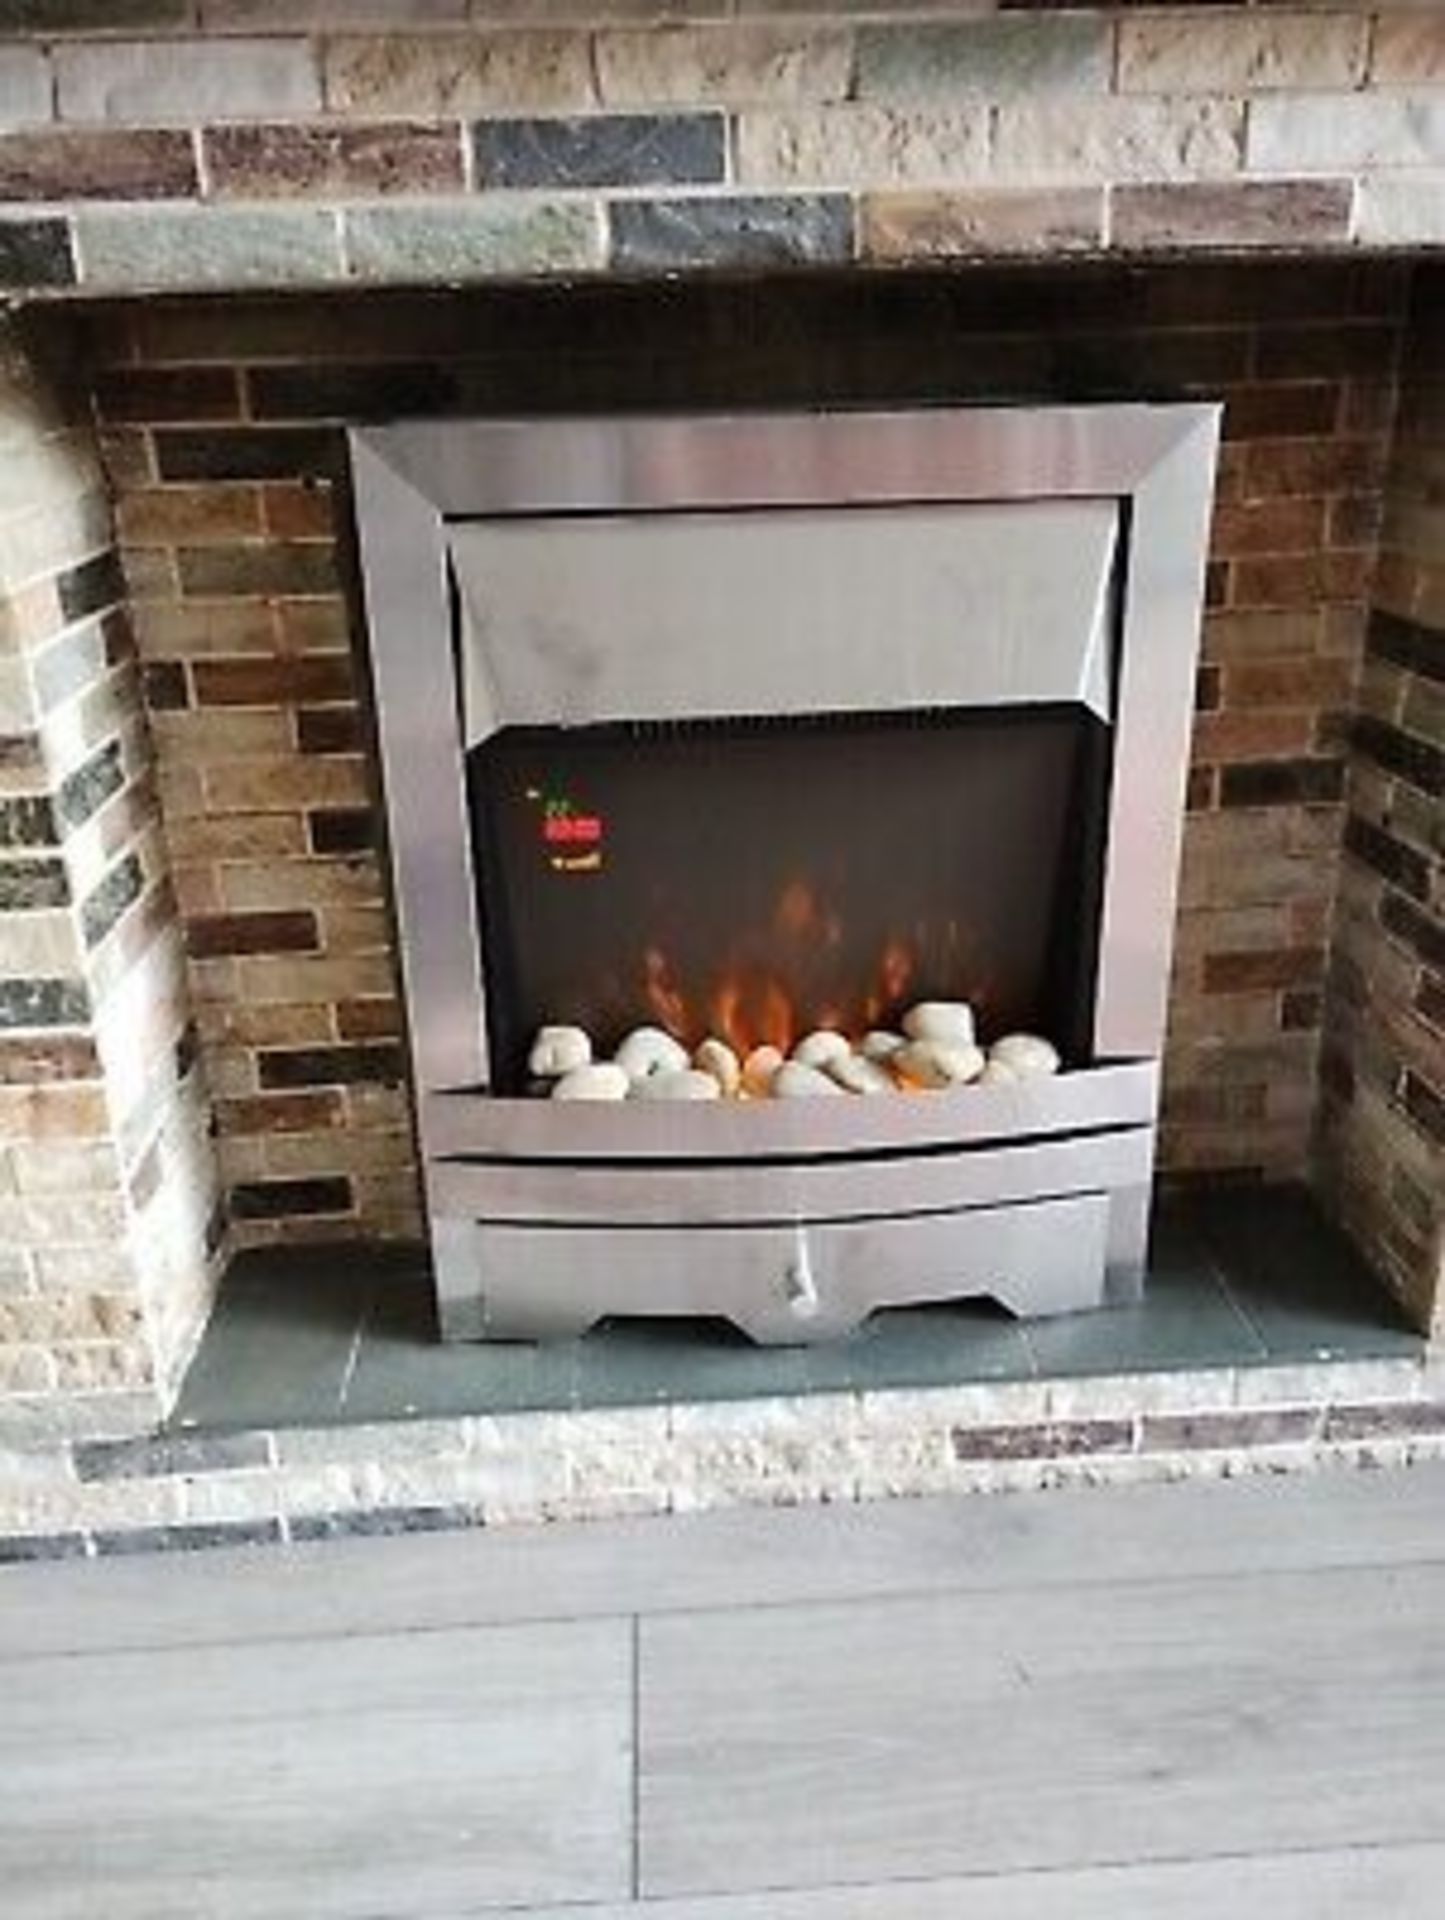 Focal Point 2kW Brushed metal effect Electric Fire - ER48